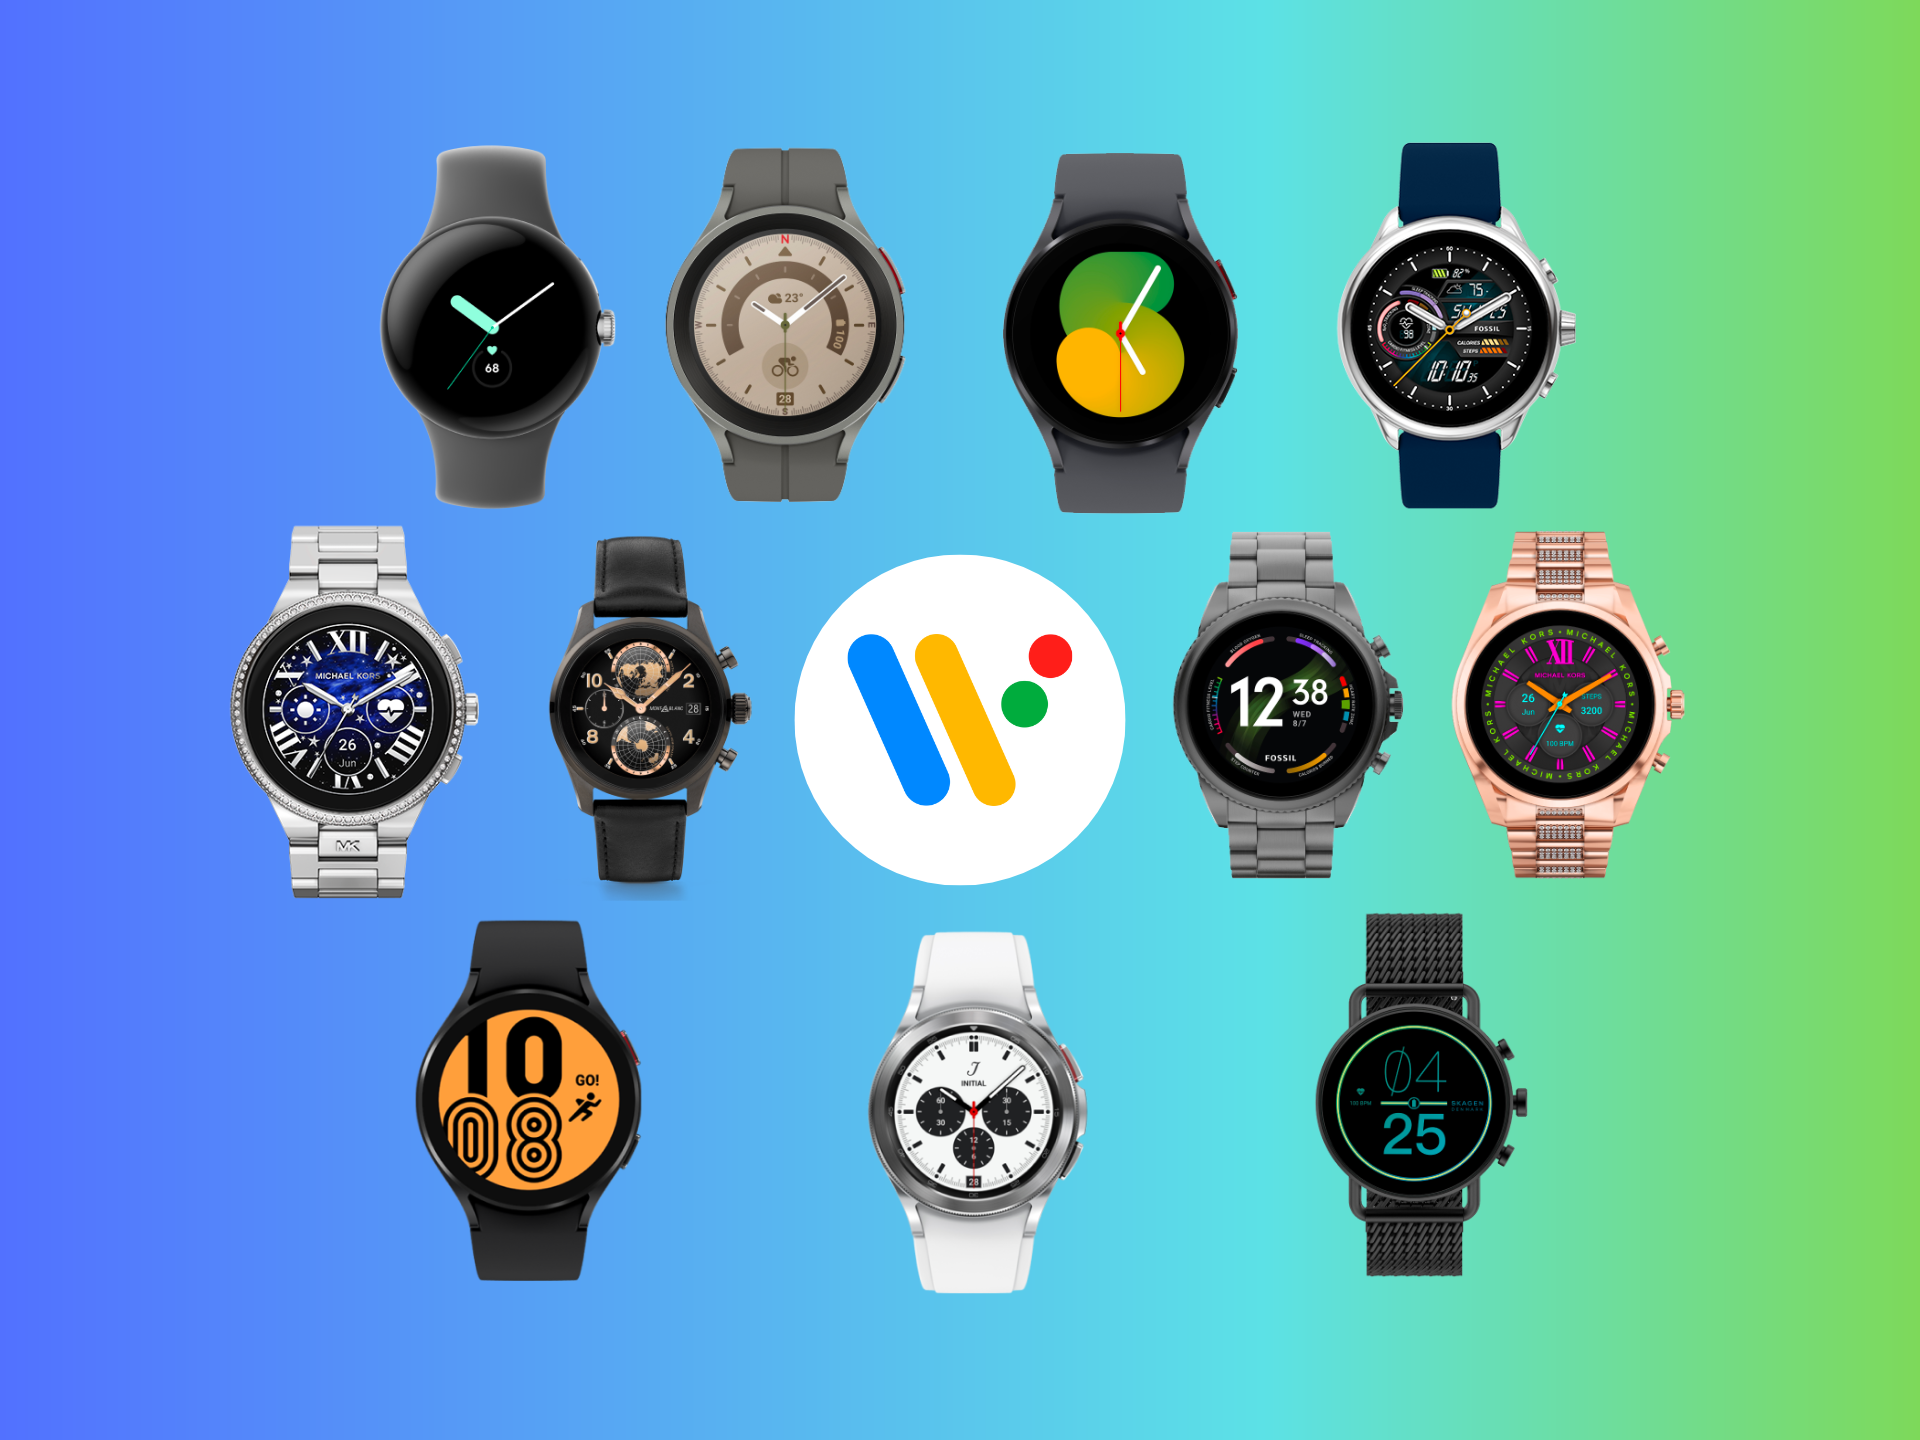 Fossil, Skagen, Google, and Samsung smartwatches running Wear OS 3.0 and above